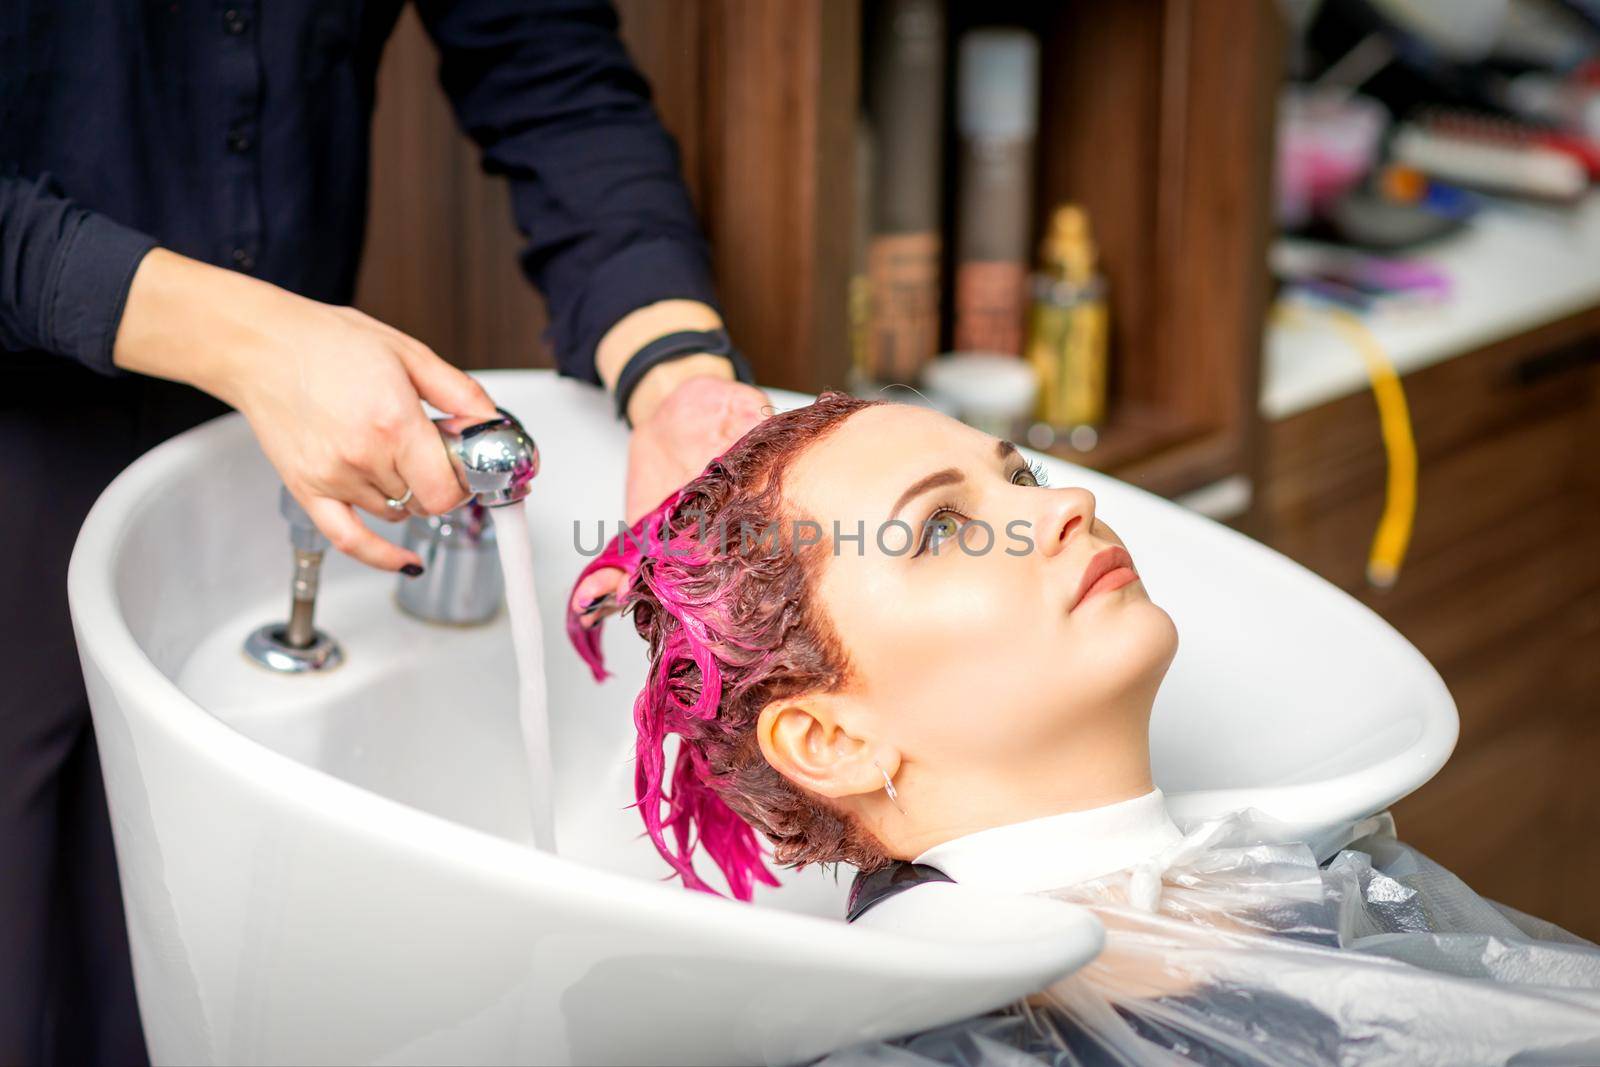 Washing dyed female hair. A young caucasian woman having her hair washed in a beauty salon. Professional hairdresser washes pink color paint off of a customer's hair. by okskukuruza